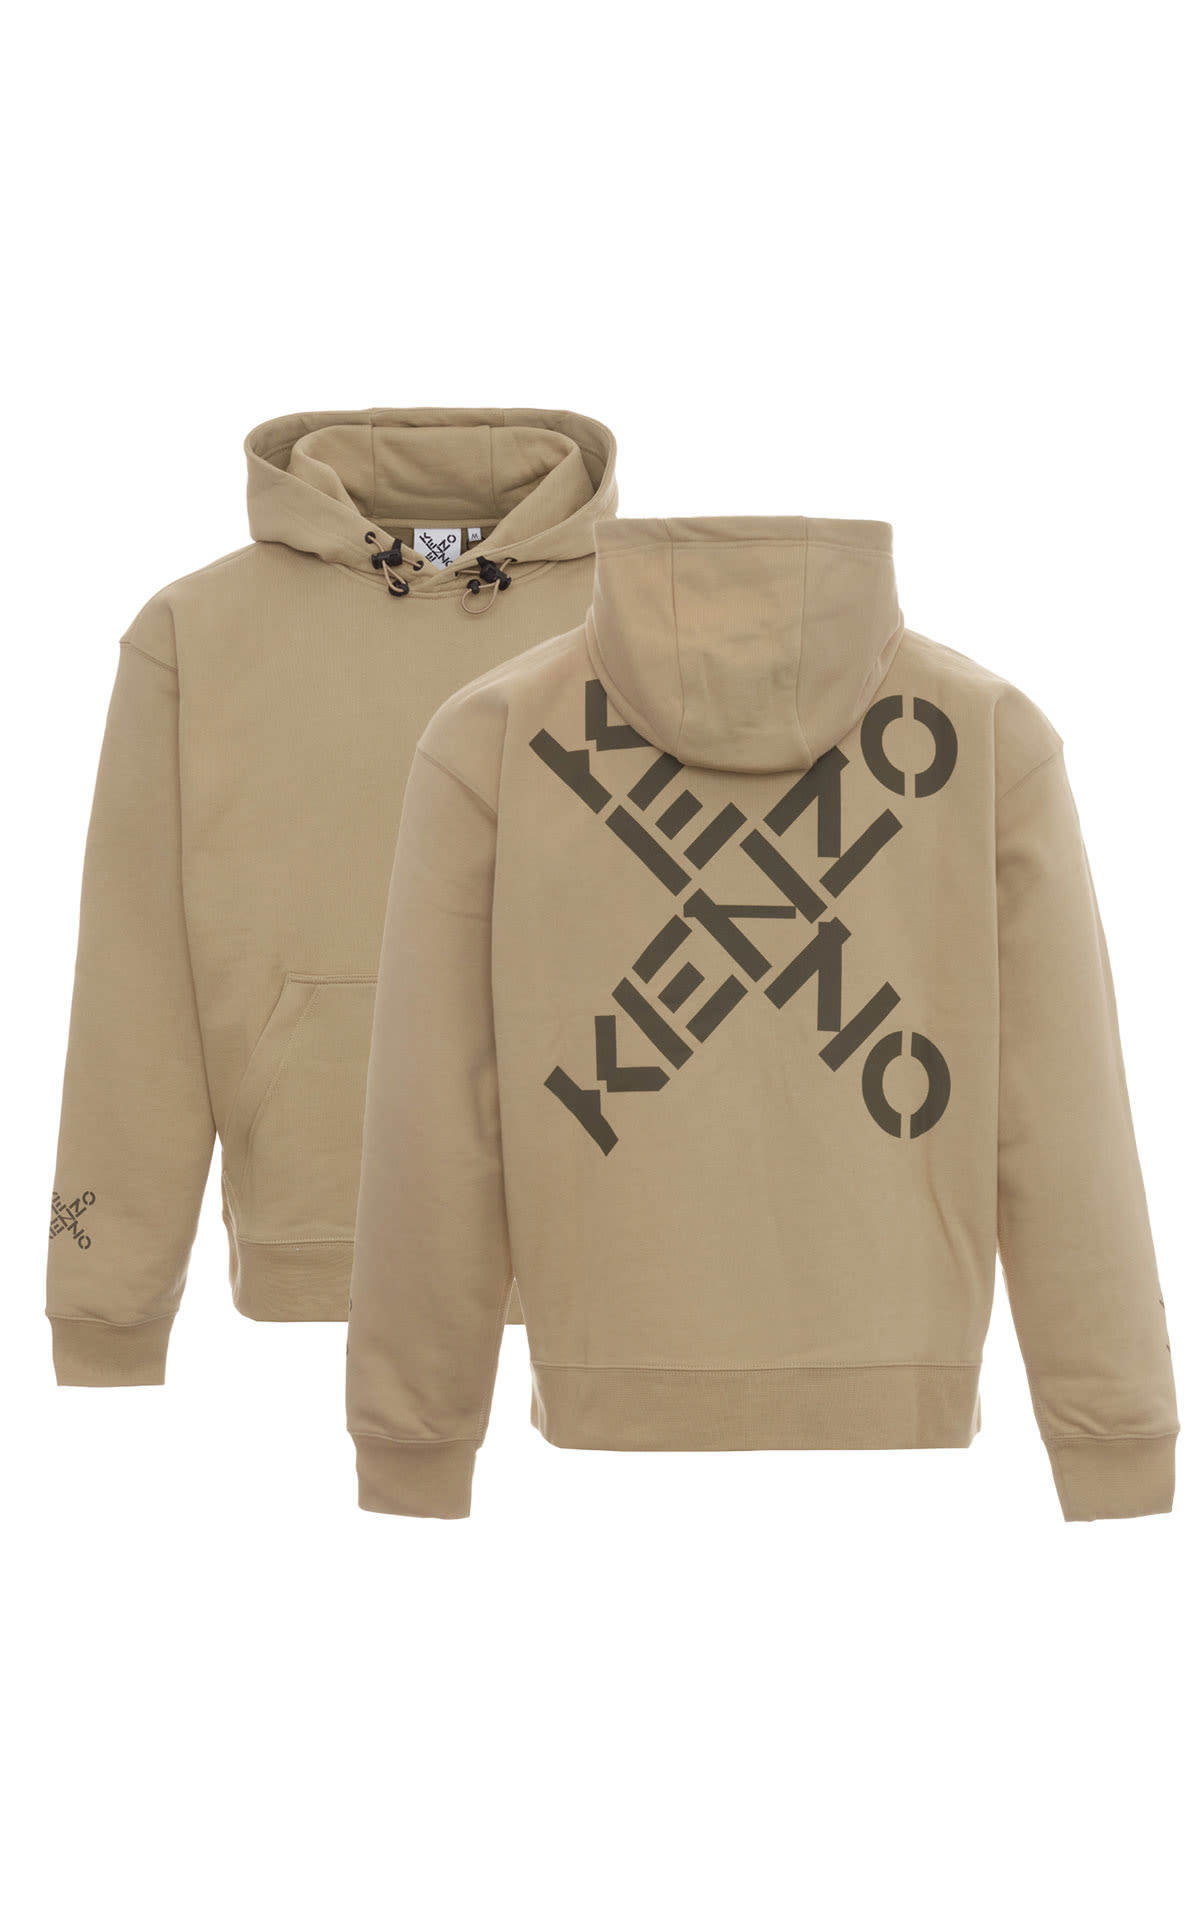 Kenzo Back logo hoodie from Bicester Village